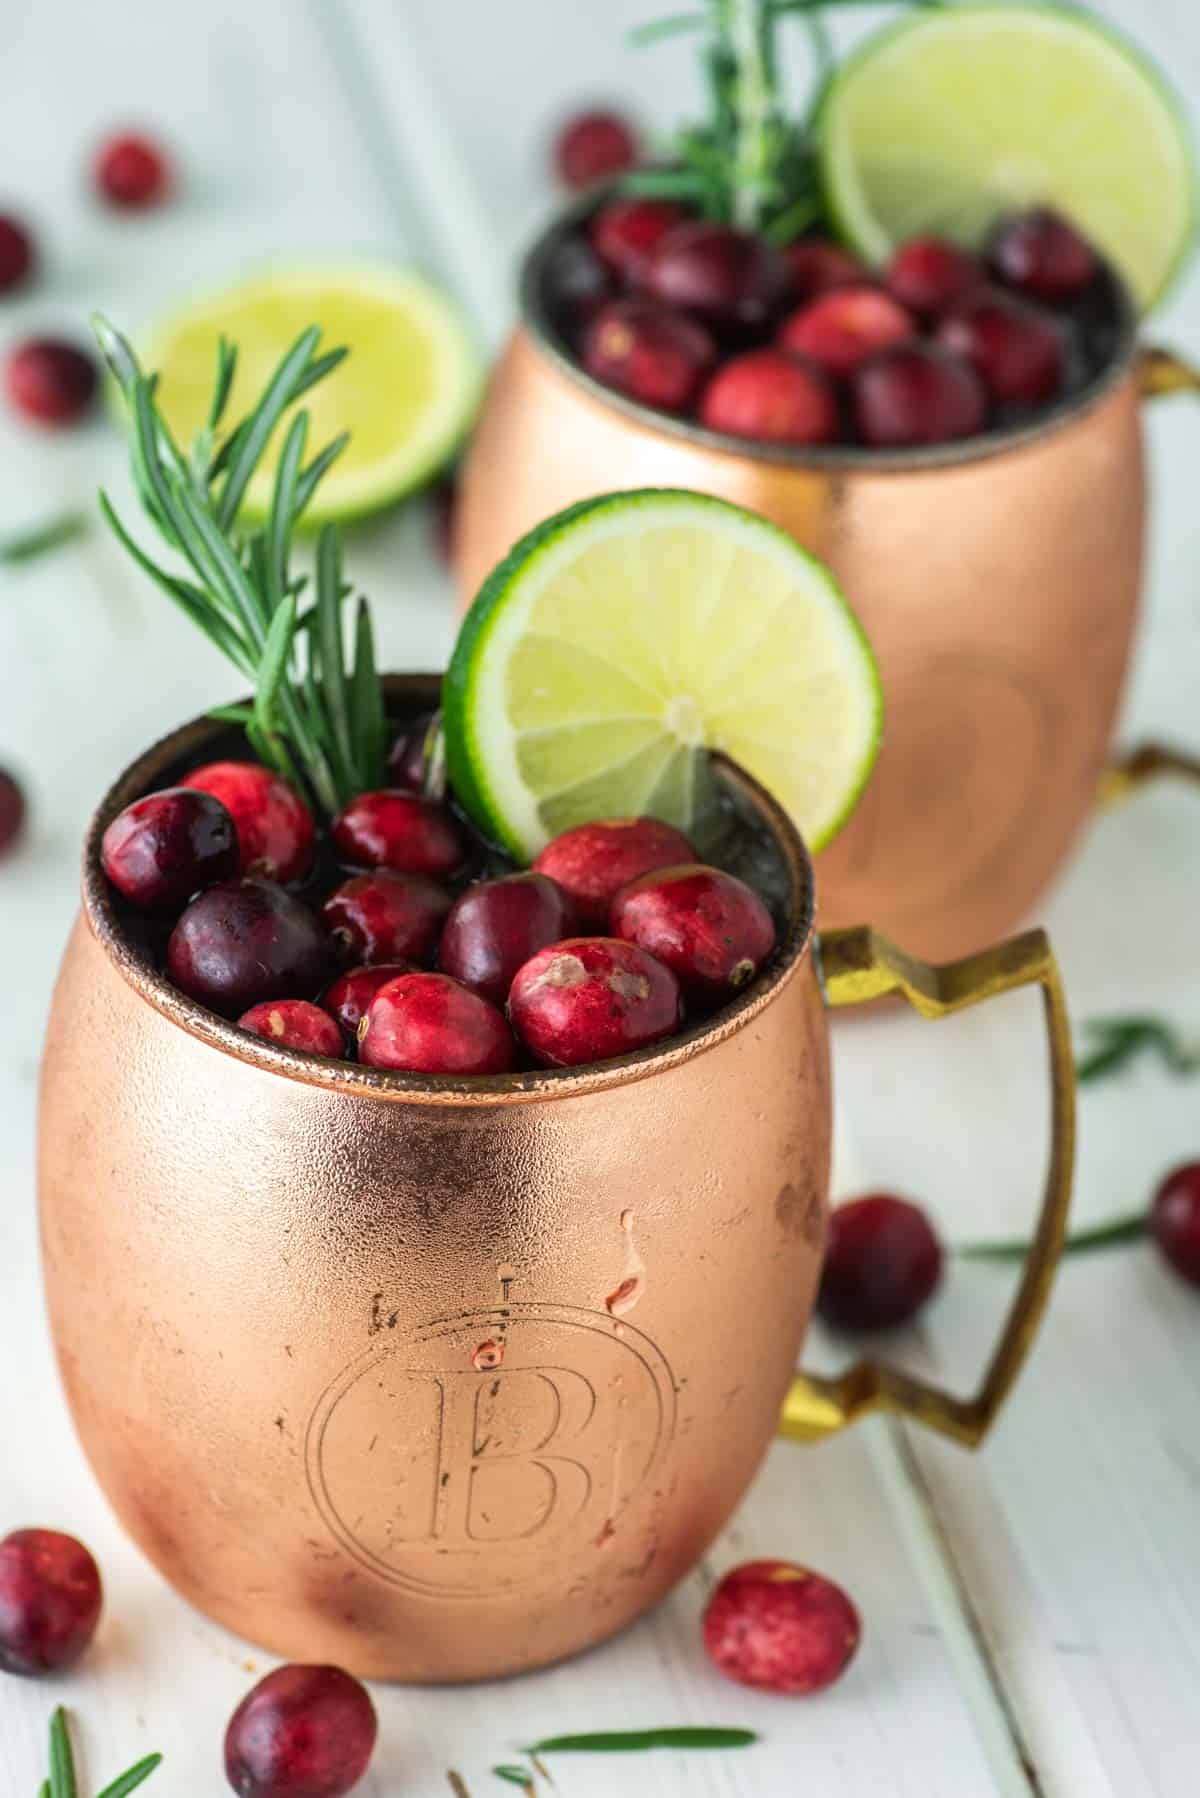 Cranberry Moscow Mule cocktails served in copper mule mugs and garnished with lime slices, rosemary sprigs, and fresh cranberries